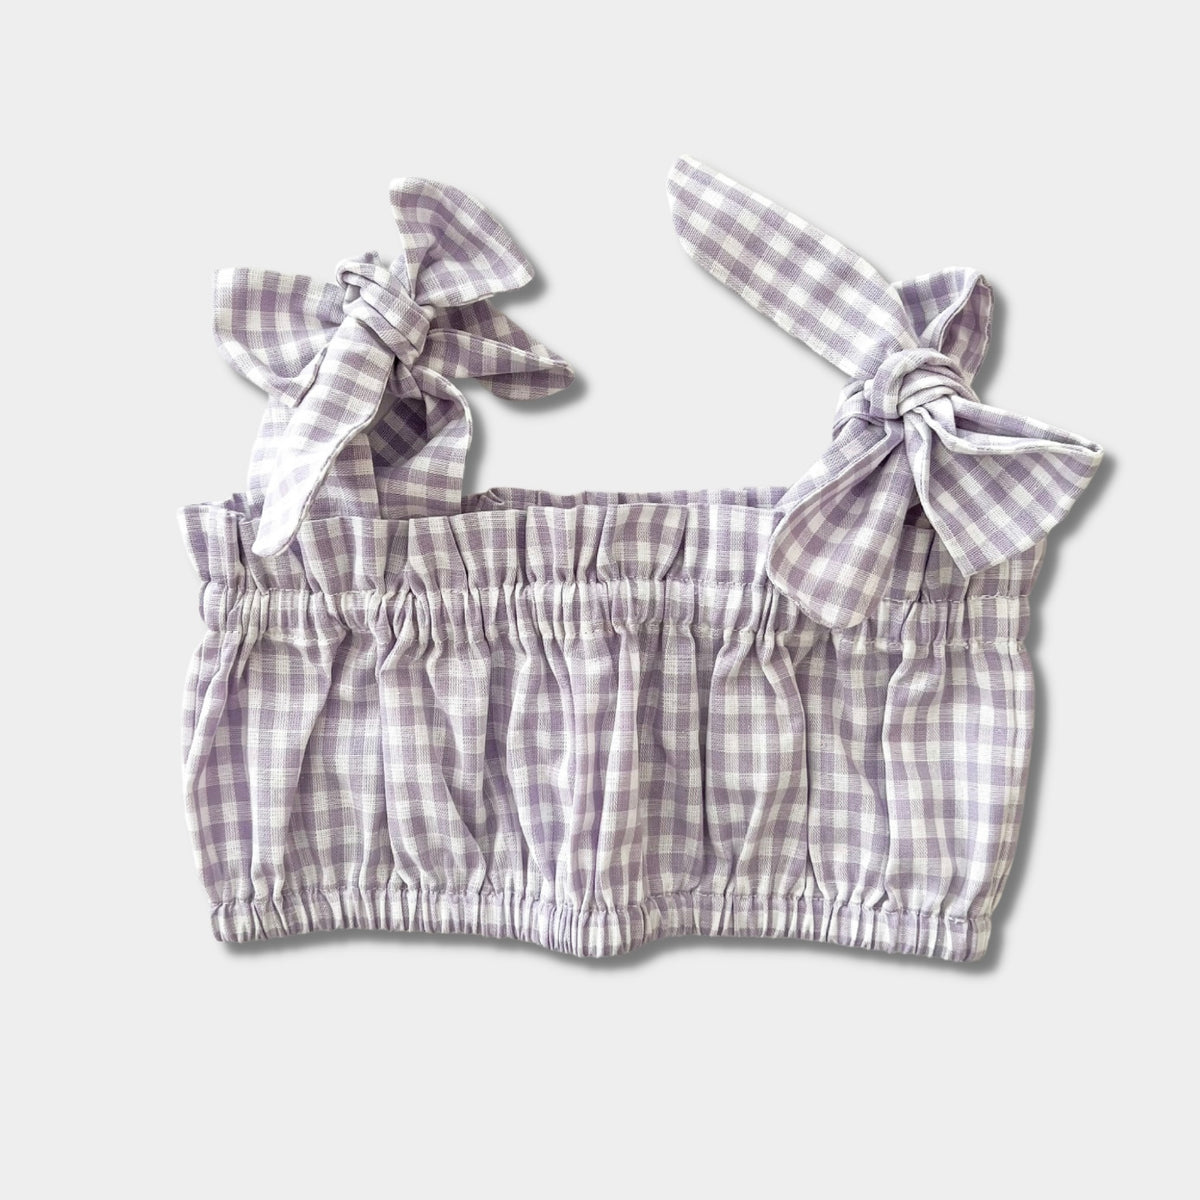 ISLA TIE TOP - LILAC GINGHAM